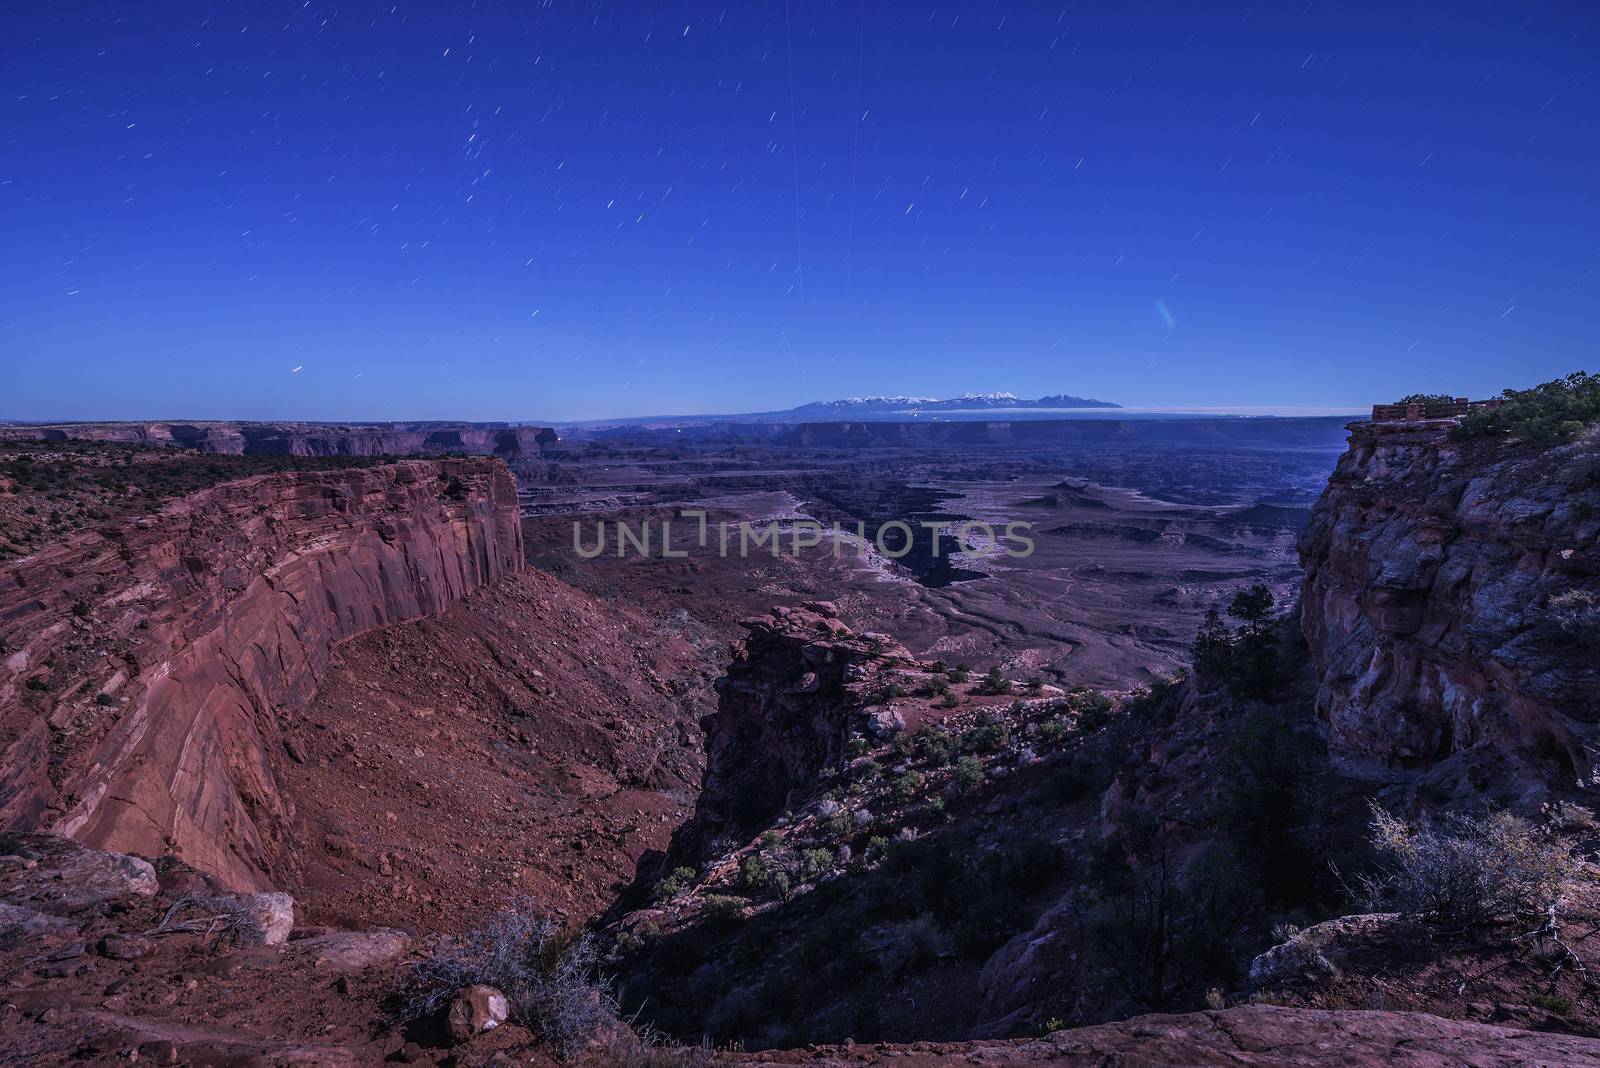 Night sky above Buck Canyon overlook in Canyonlands National Park, Utah by nickfox